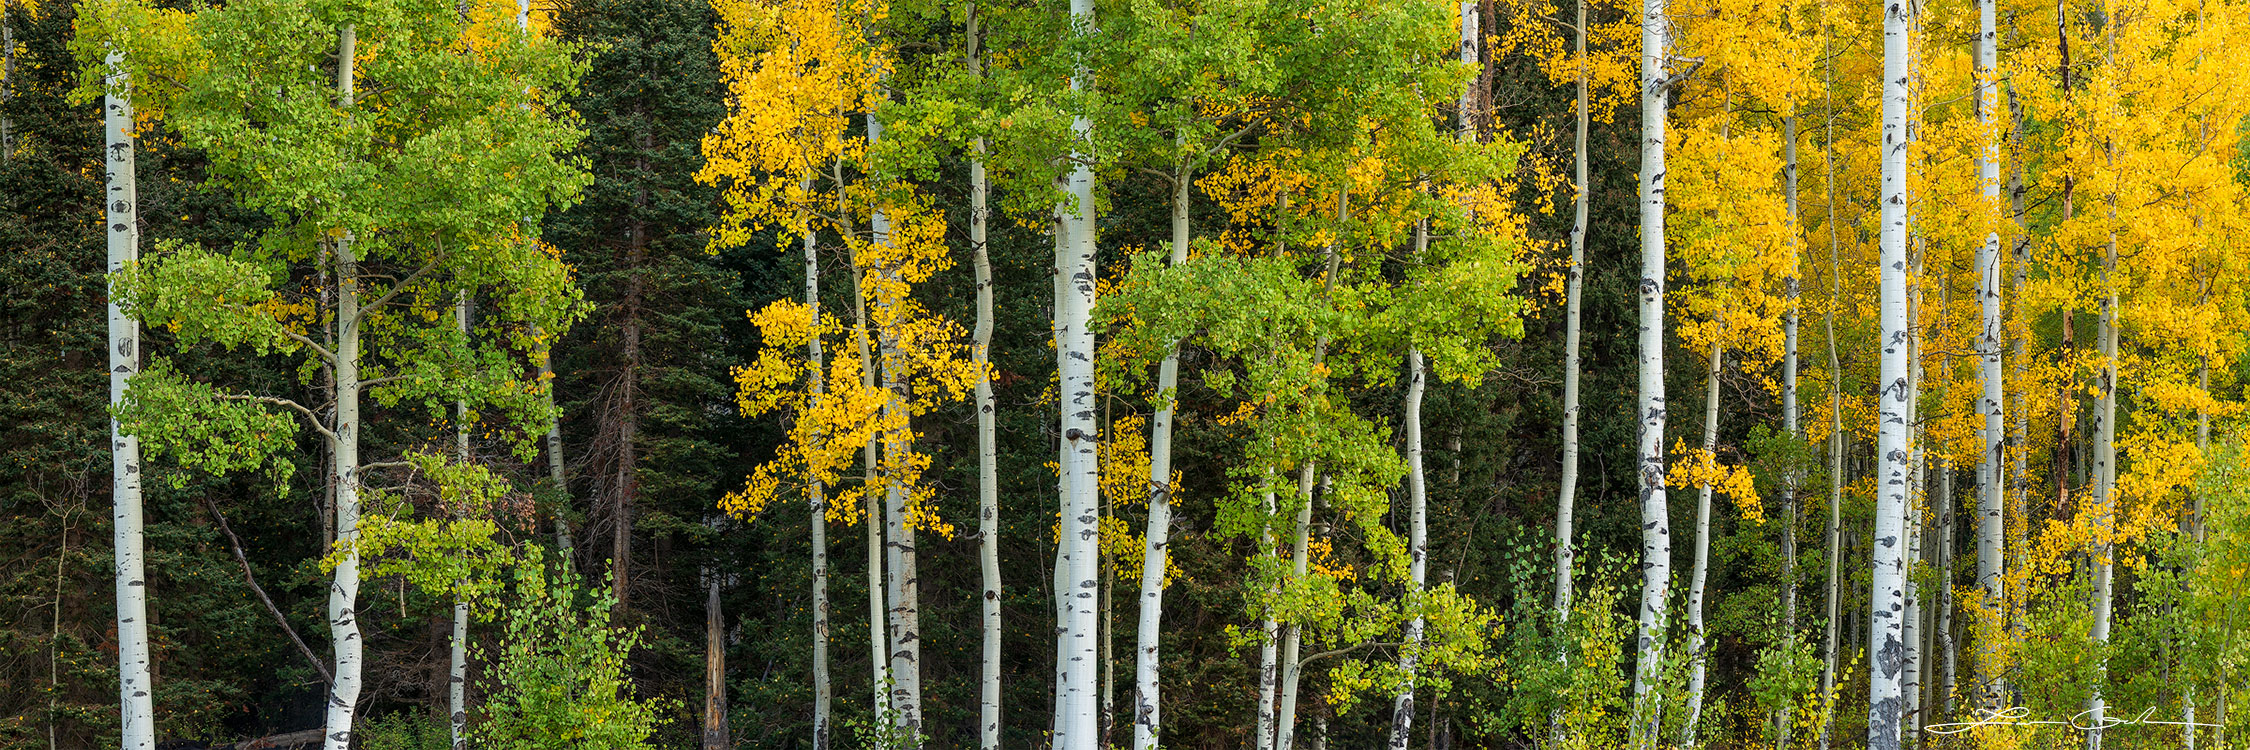 A rainbow of aspen fall colors decorate a mixed forest of deciduous and evergreen trees - Gintchin Fine Art